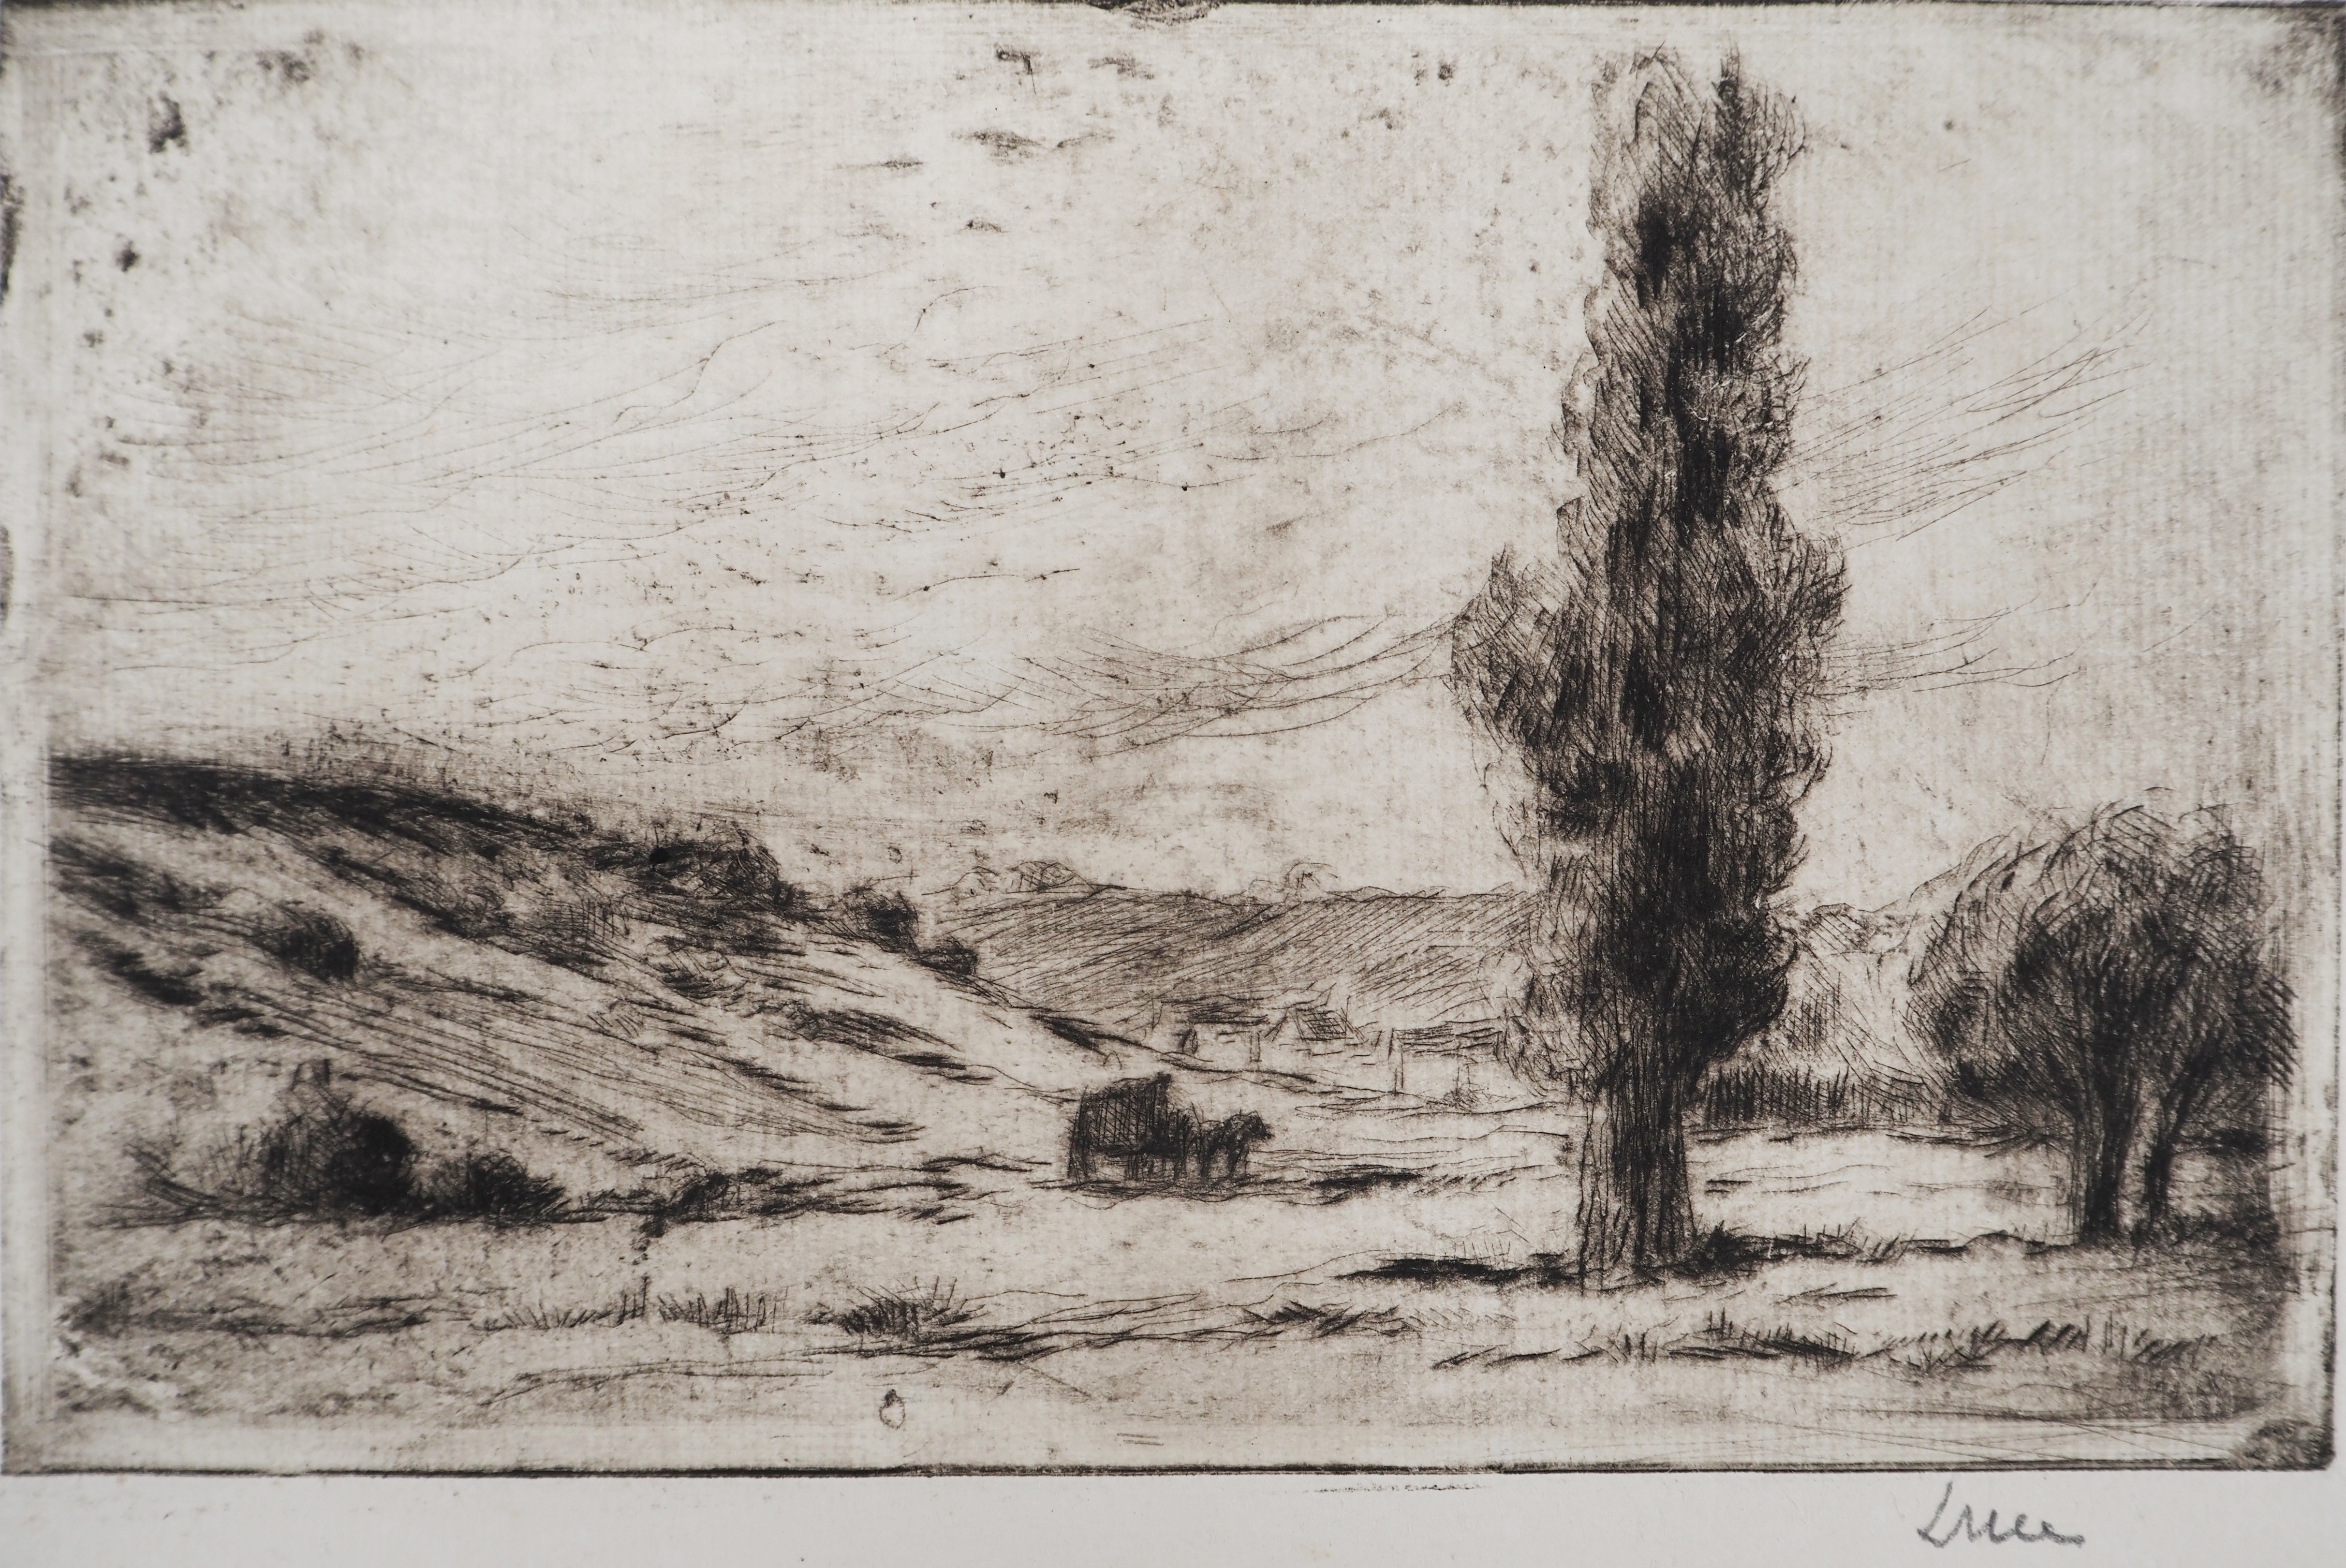 Artwork by Maximilien Luce, Countryside landscape, Made of drypoint etching on laid paper